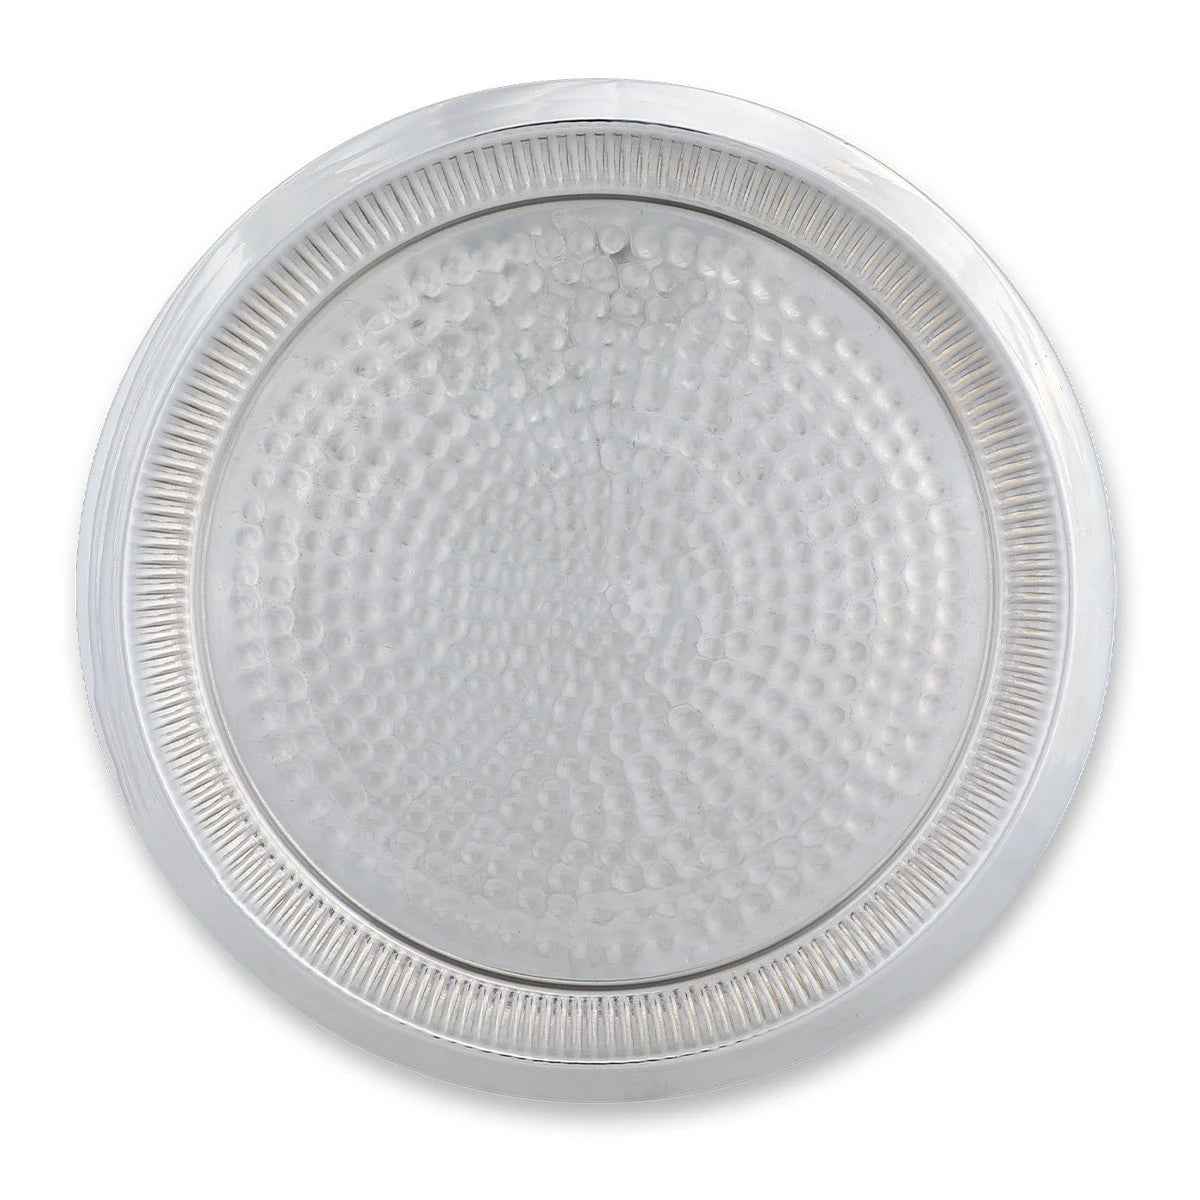 Top View of Glossy Silver Colored Brass Metal Round Plate with Hand-Hammered Texture